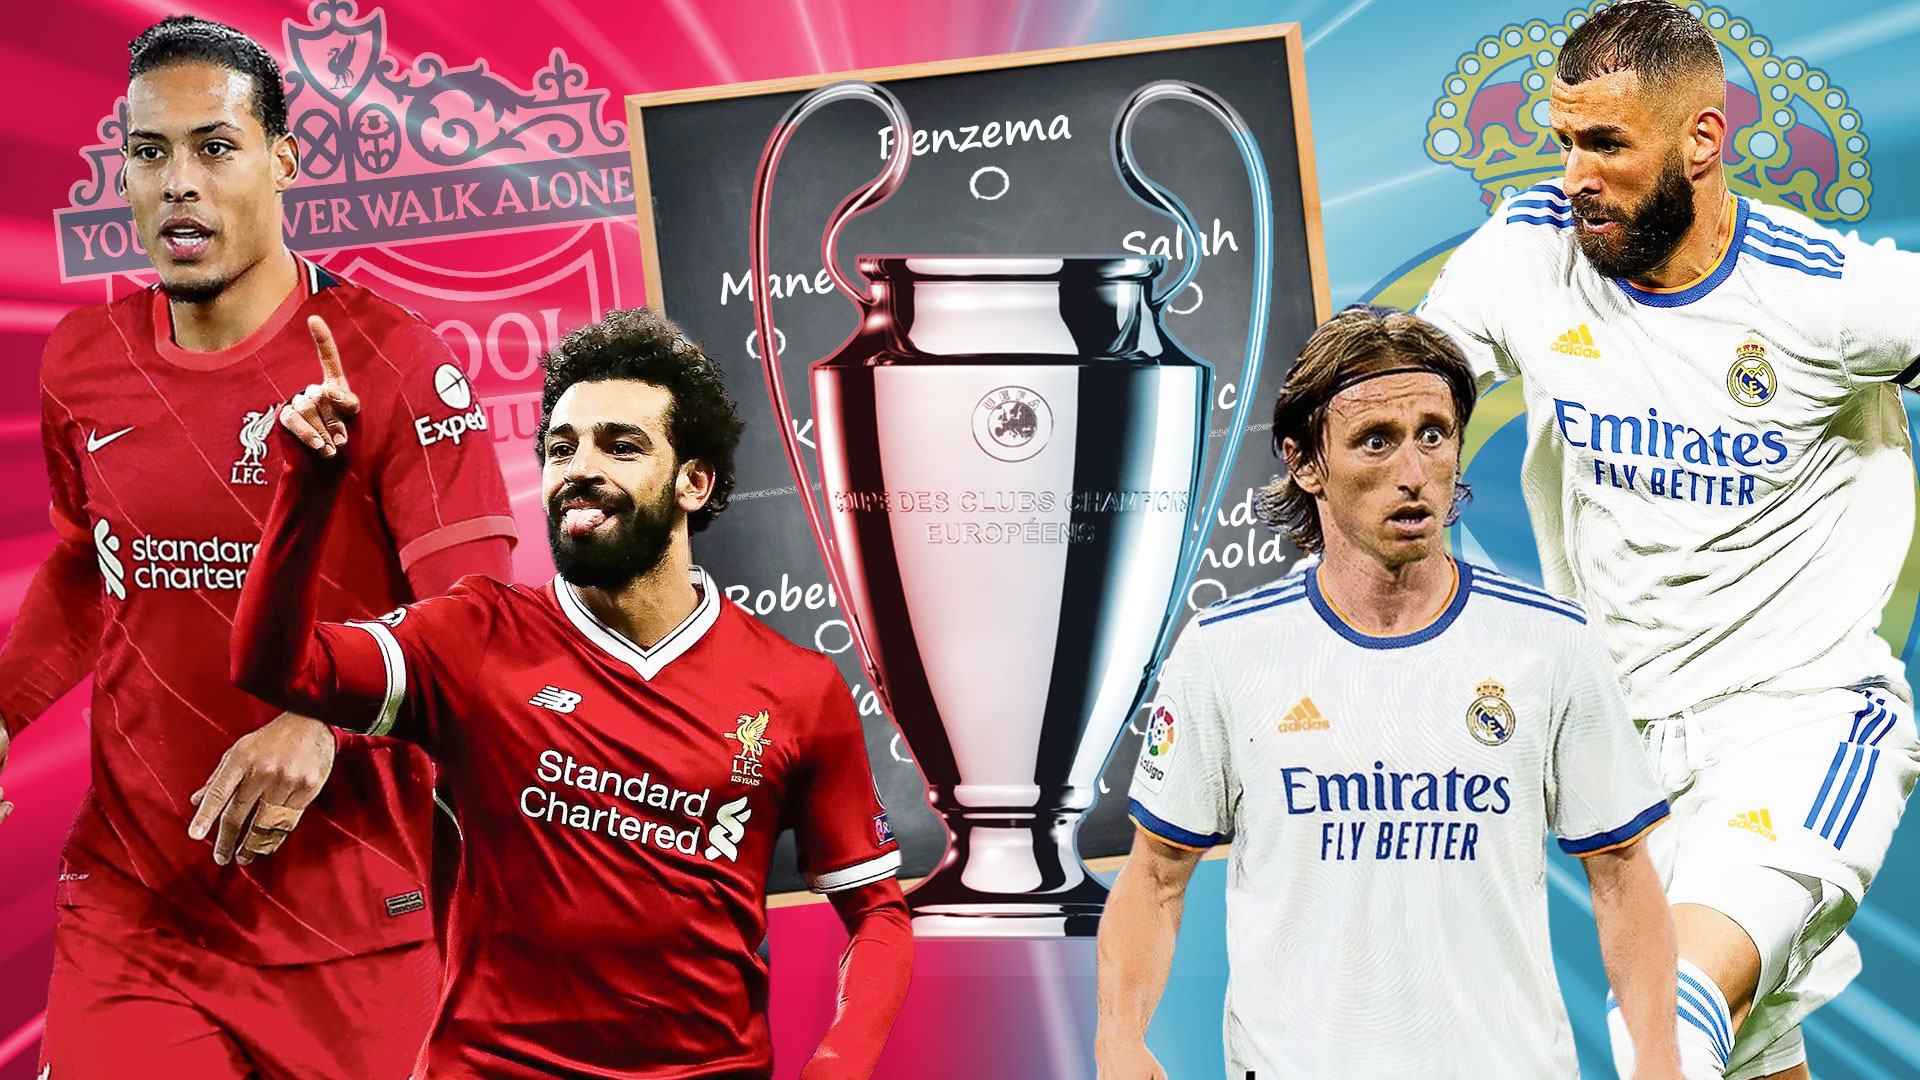 Real Madrid vs Liverpool combined XI ahead of huge Champions League final clash as Reds sweat on injuries to key players